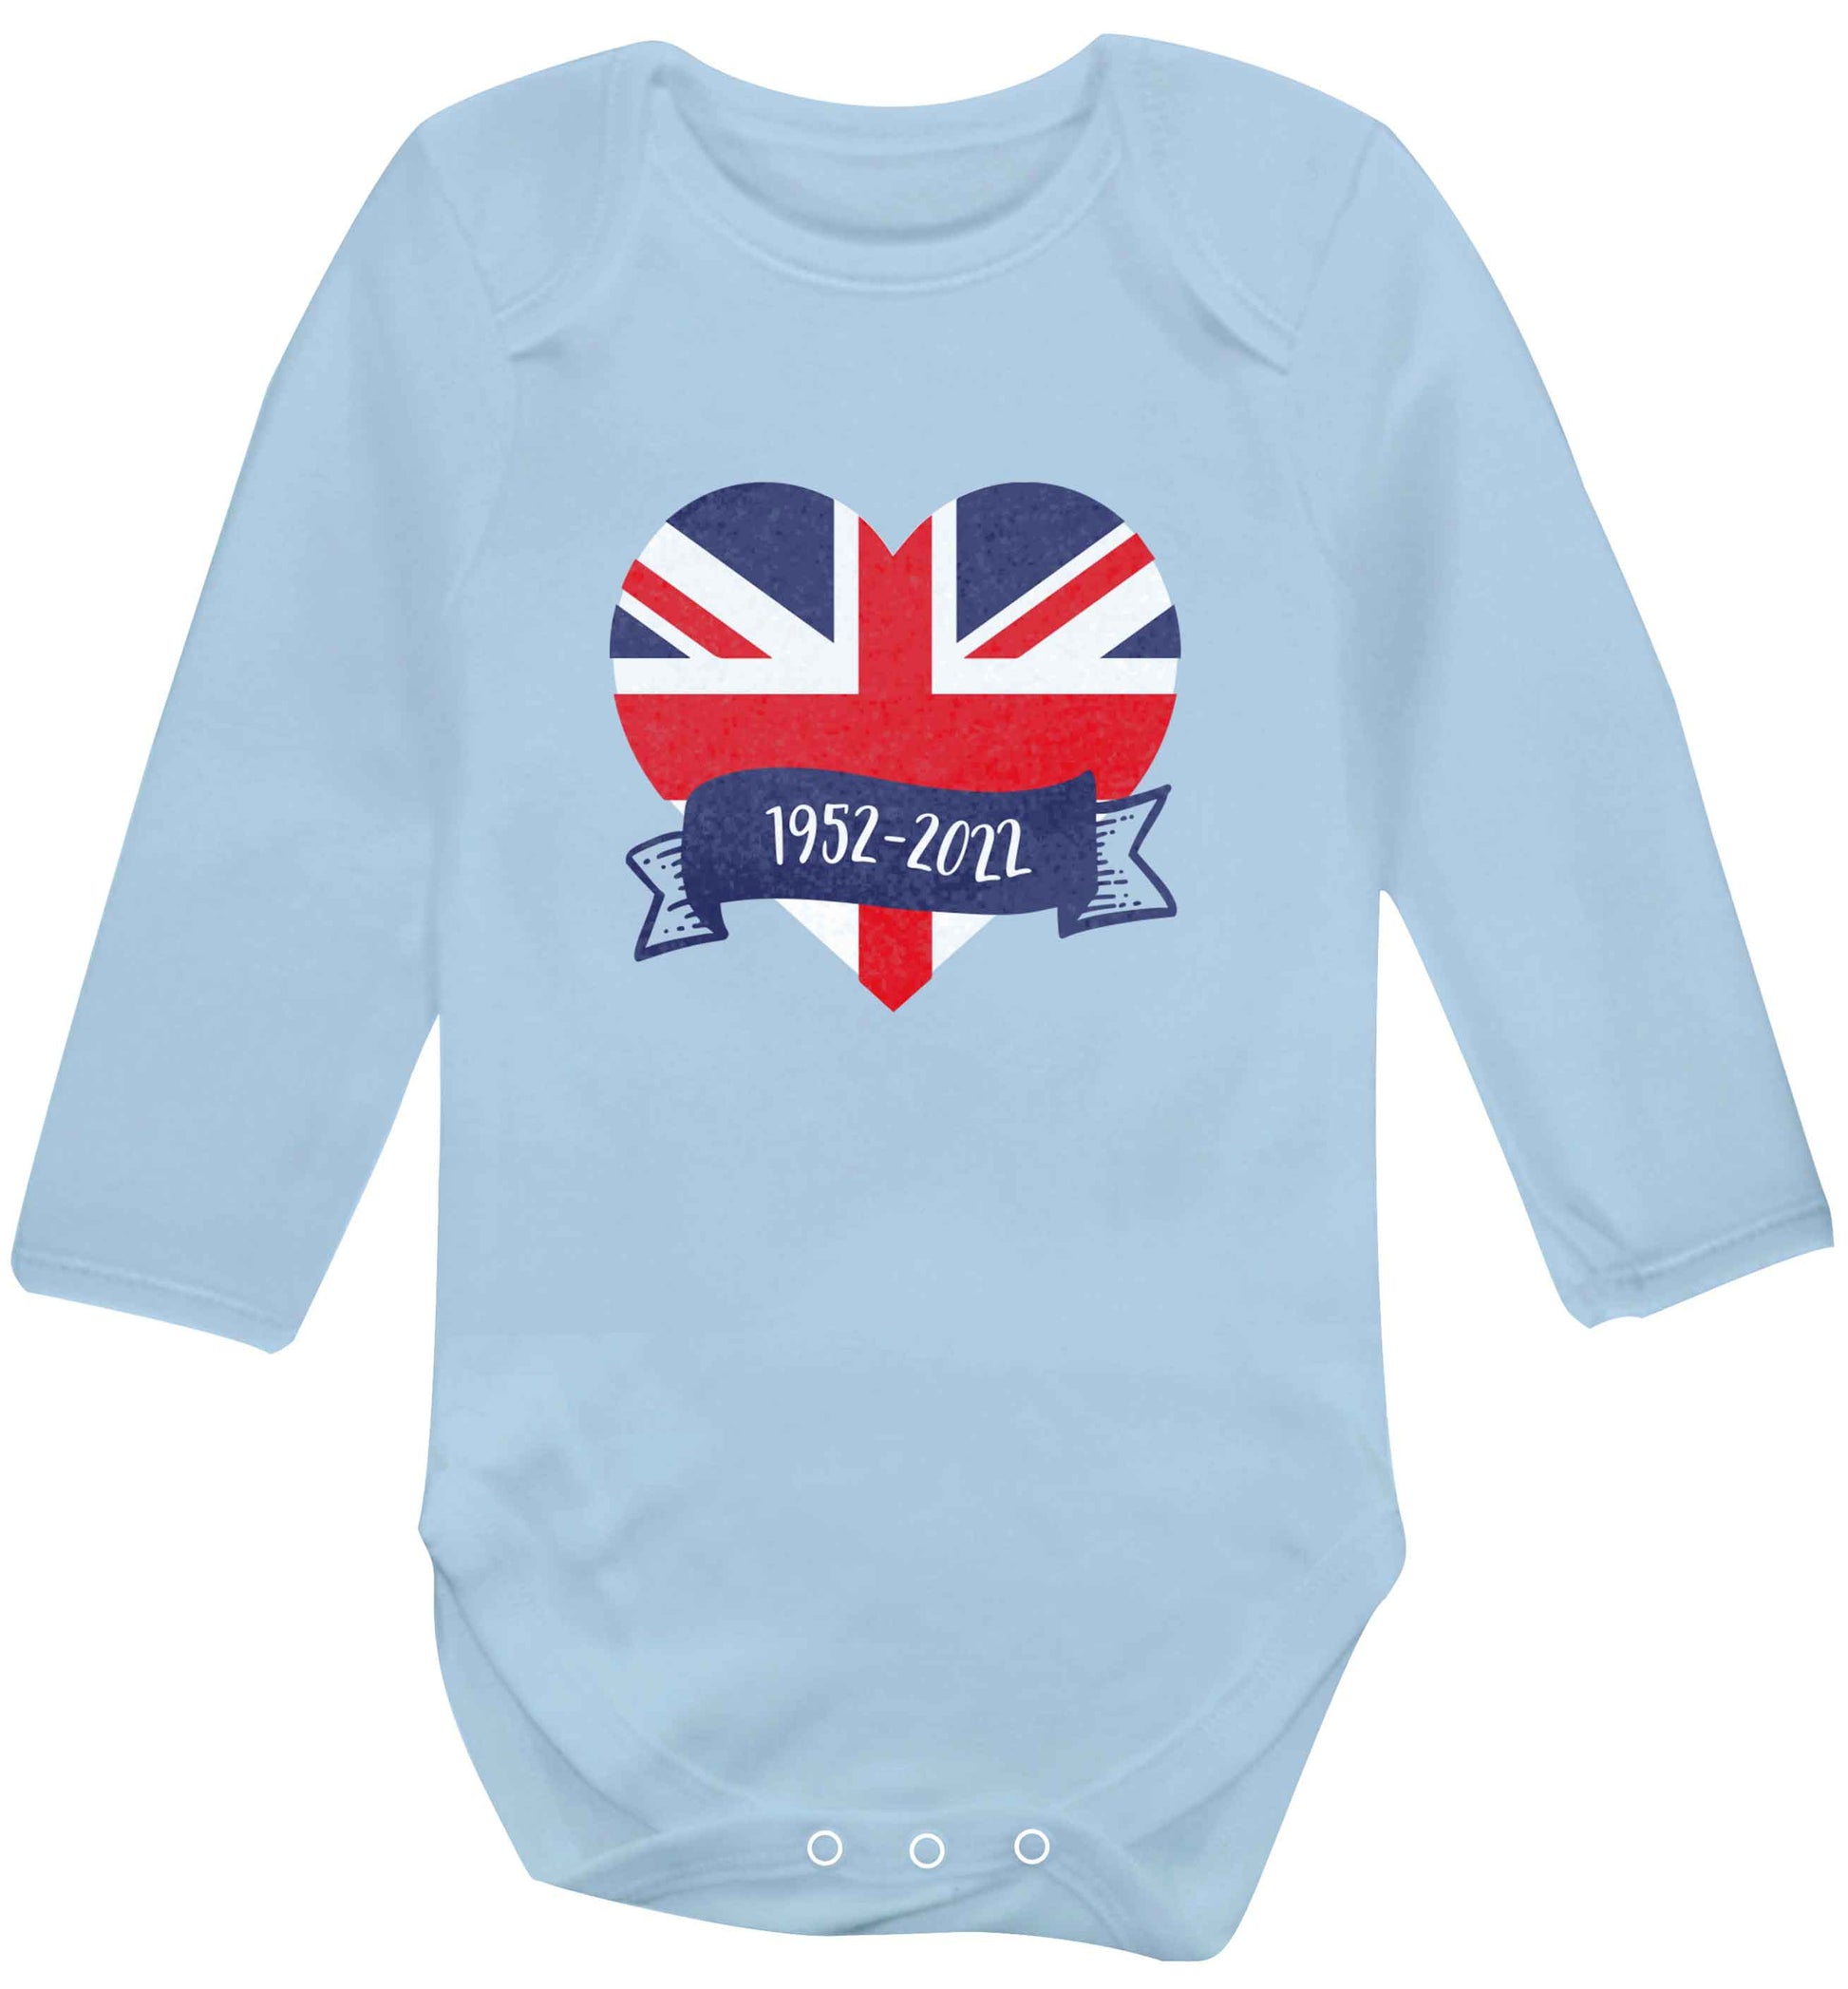 British flag heart Queens jubilee baby vest long sleeved pale blue 6-12 months